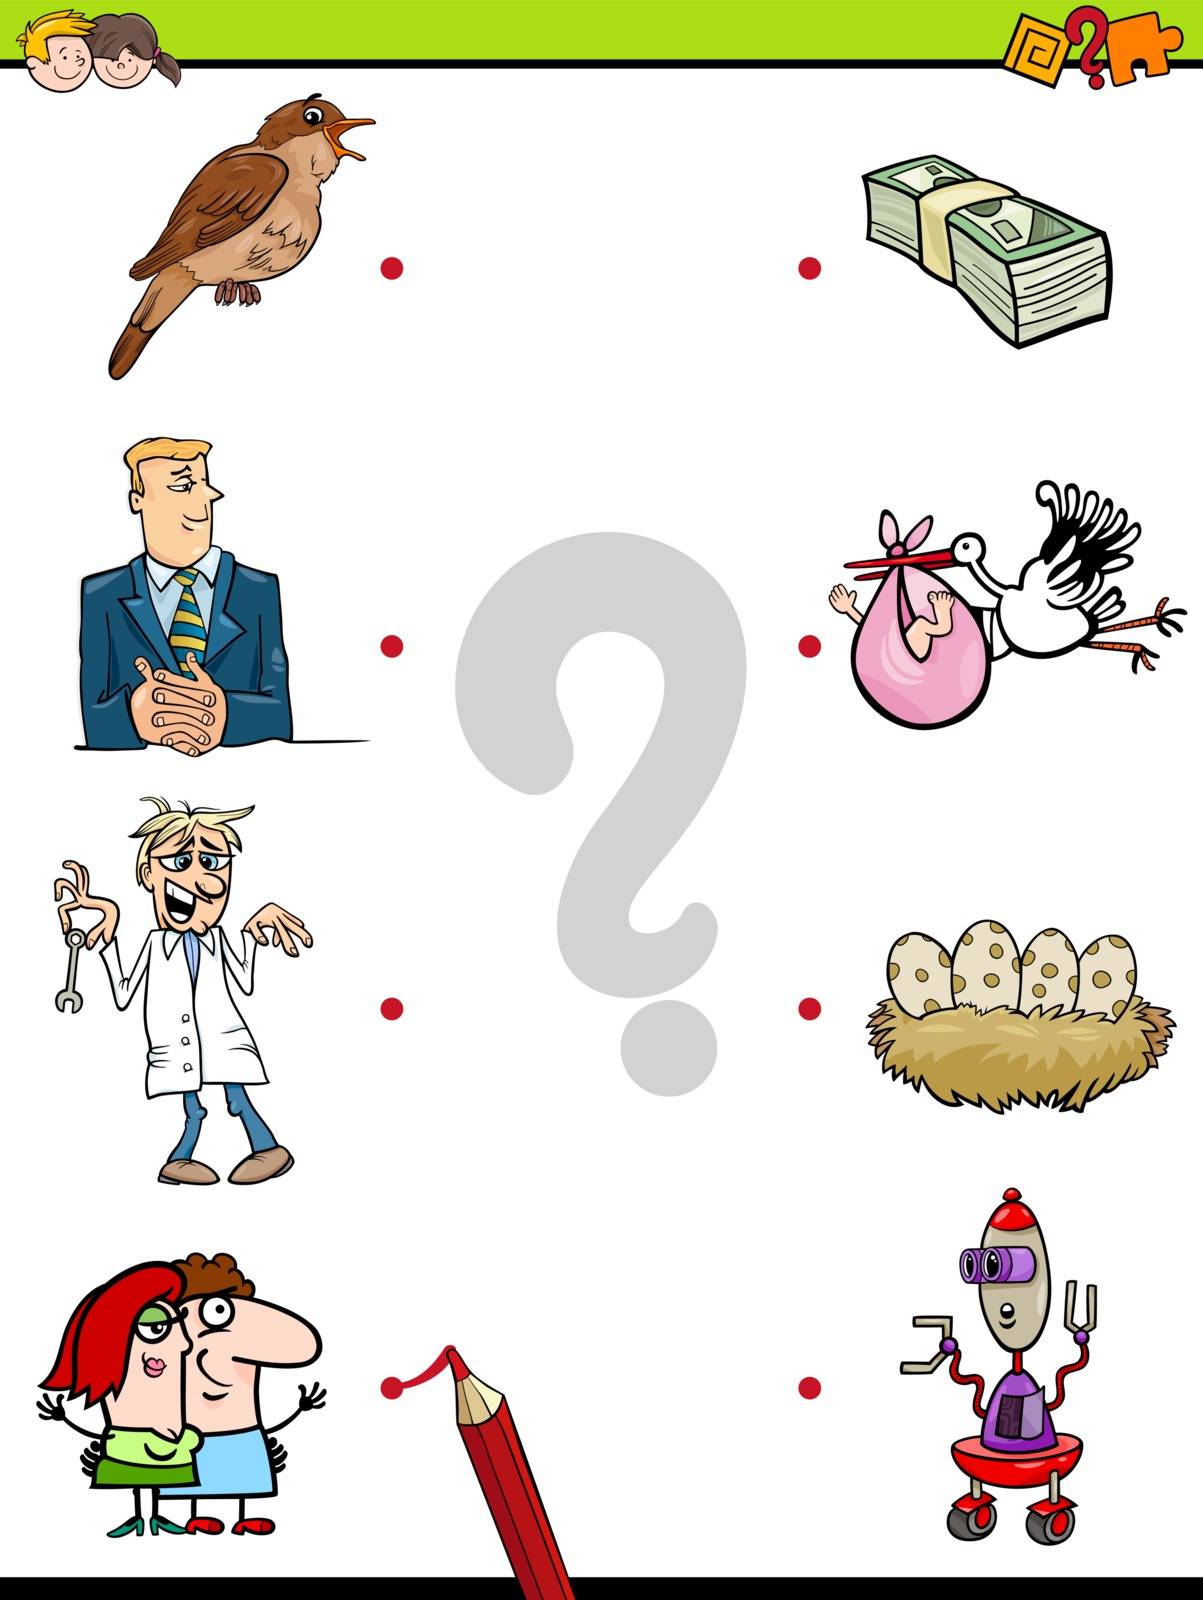 Cartoon Illustration of Education Pictures Matching Game for Children with People and Animals and Objects